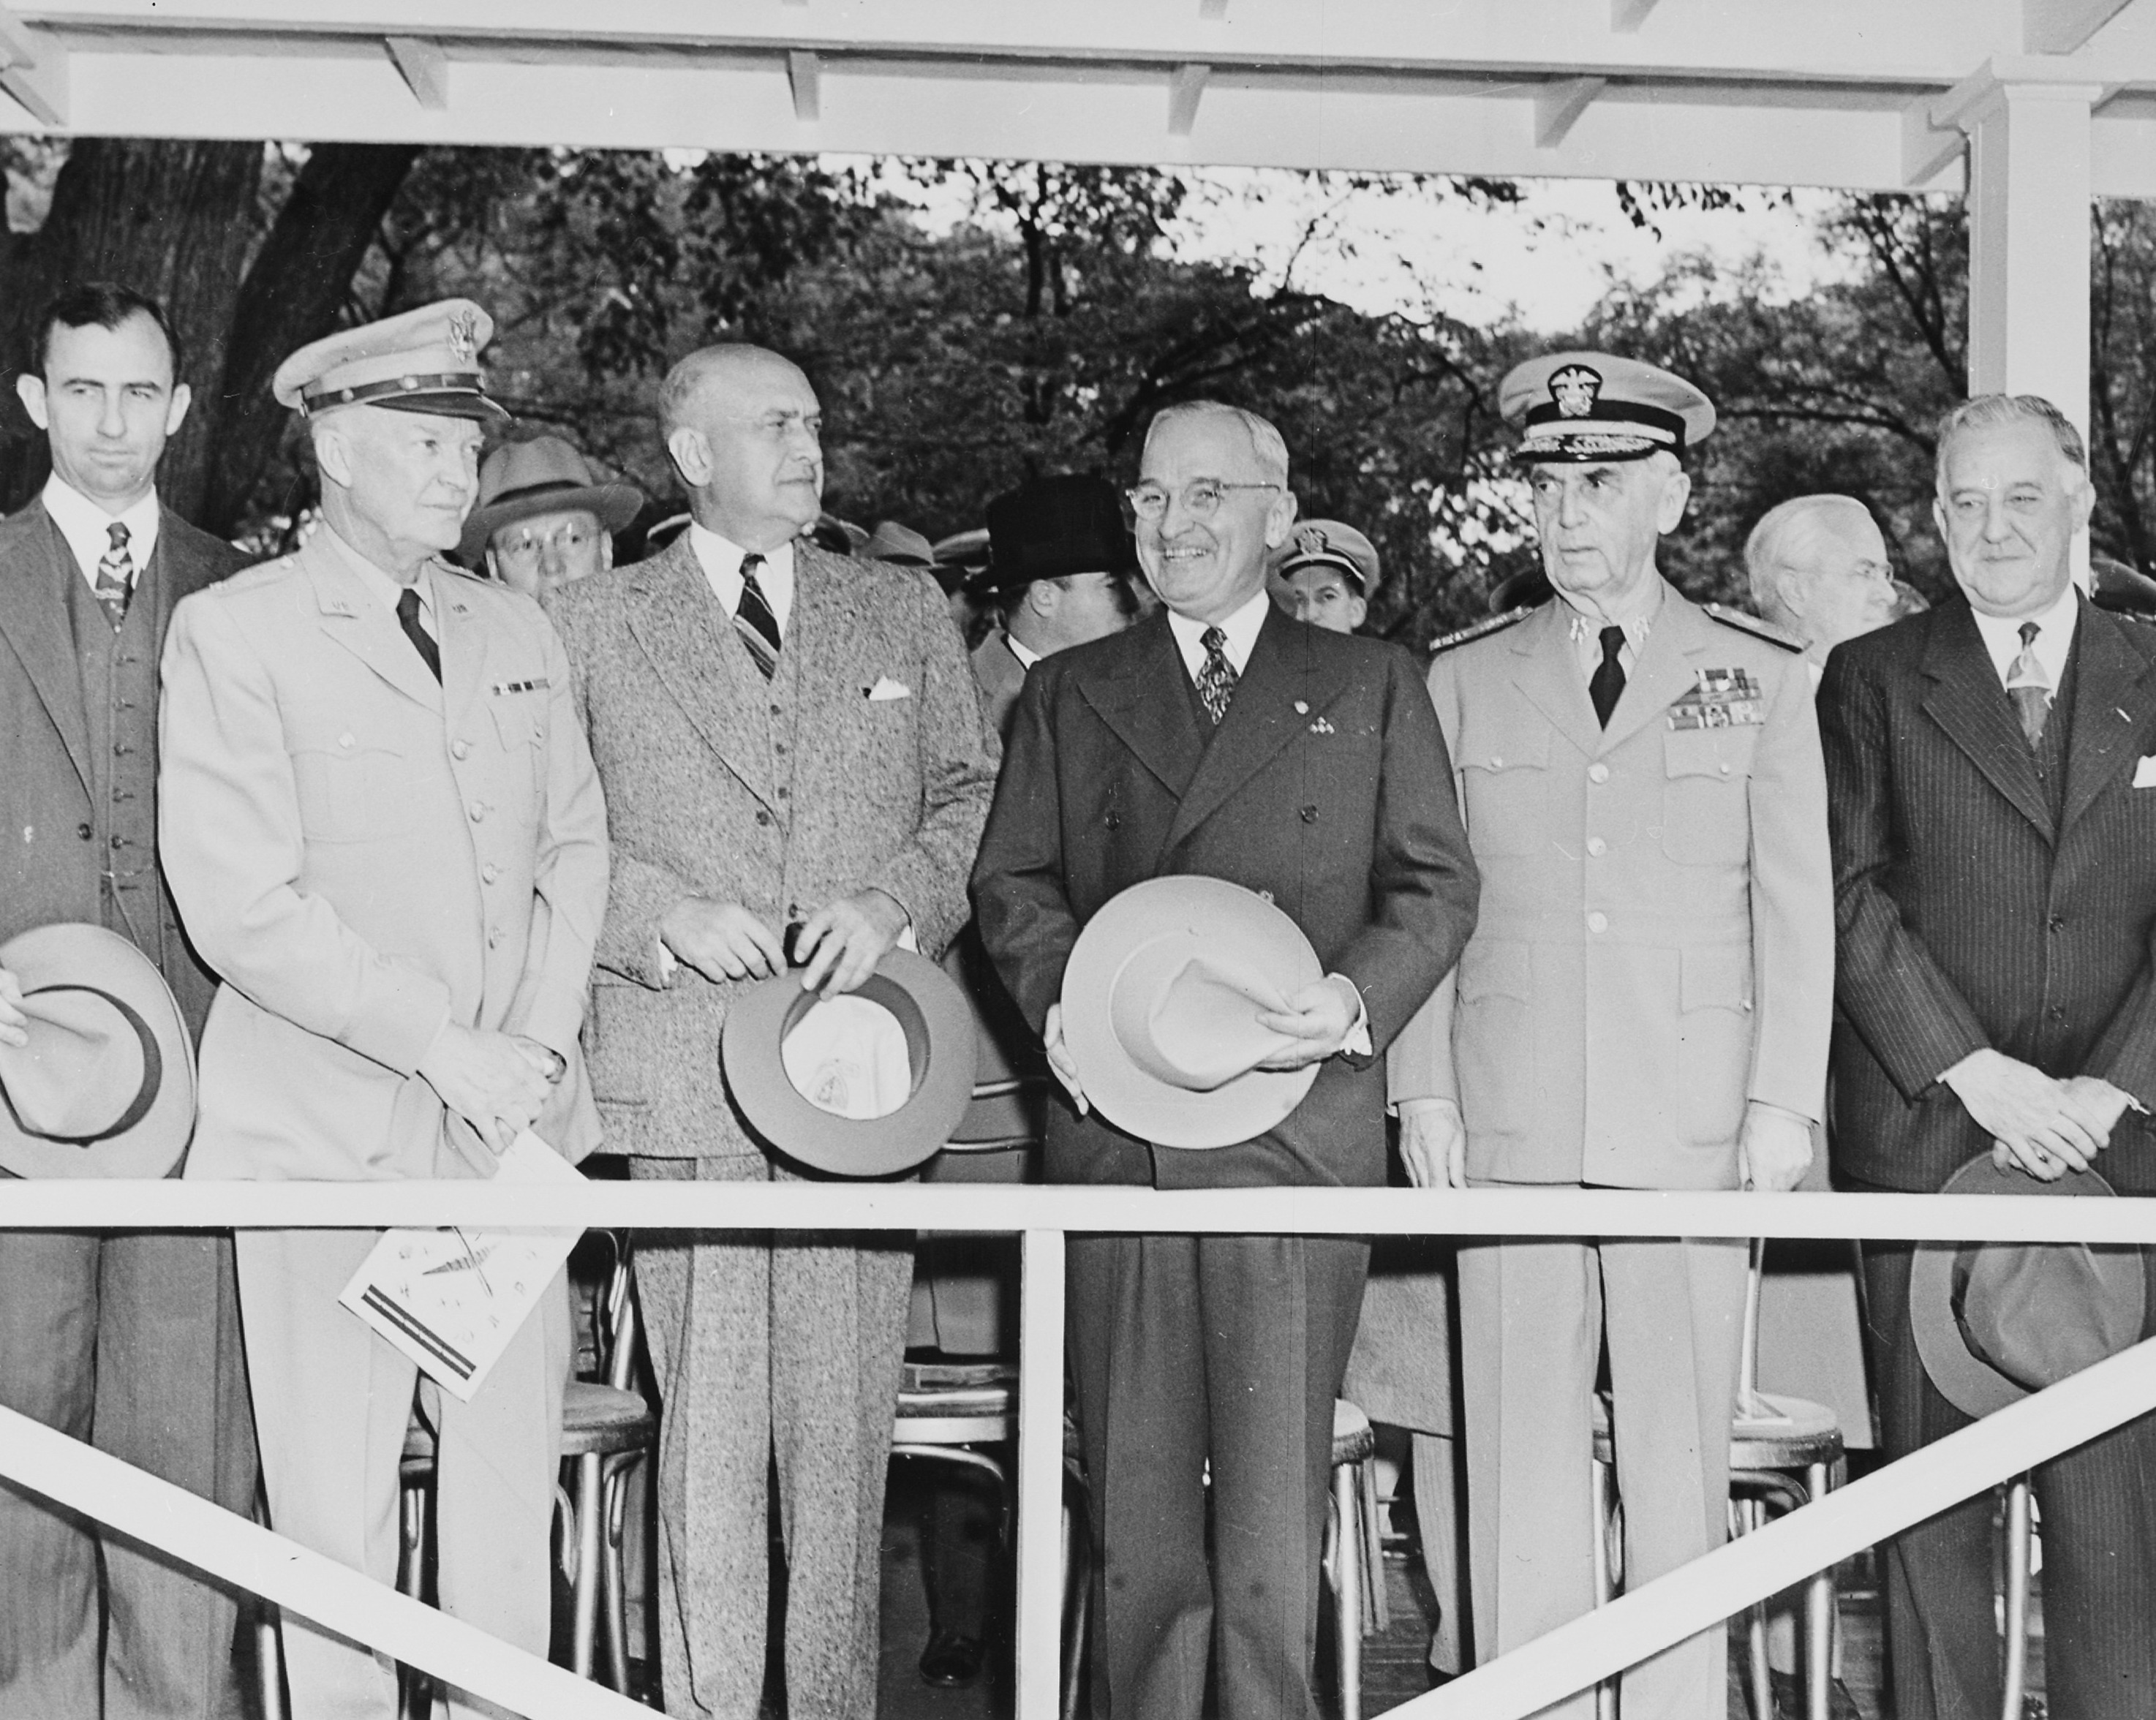 General Dwight Eisenhower, US Secretary of Defense Louis Johnson, US President Harry Truman, and Admiral William Leahy at the Arm Forces Day parade, 20 May 1950, photo 2 of 2